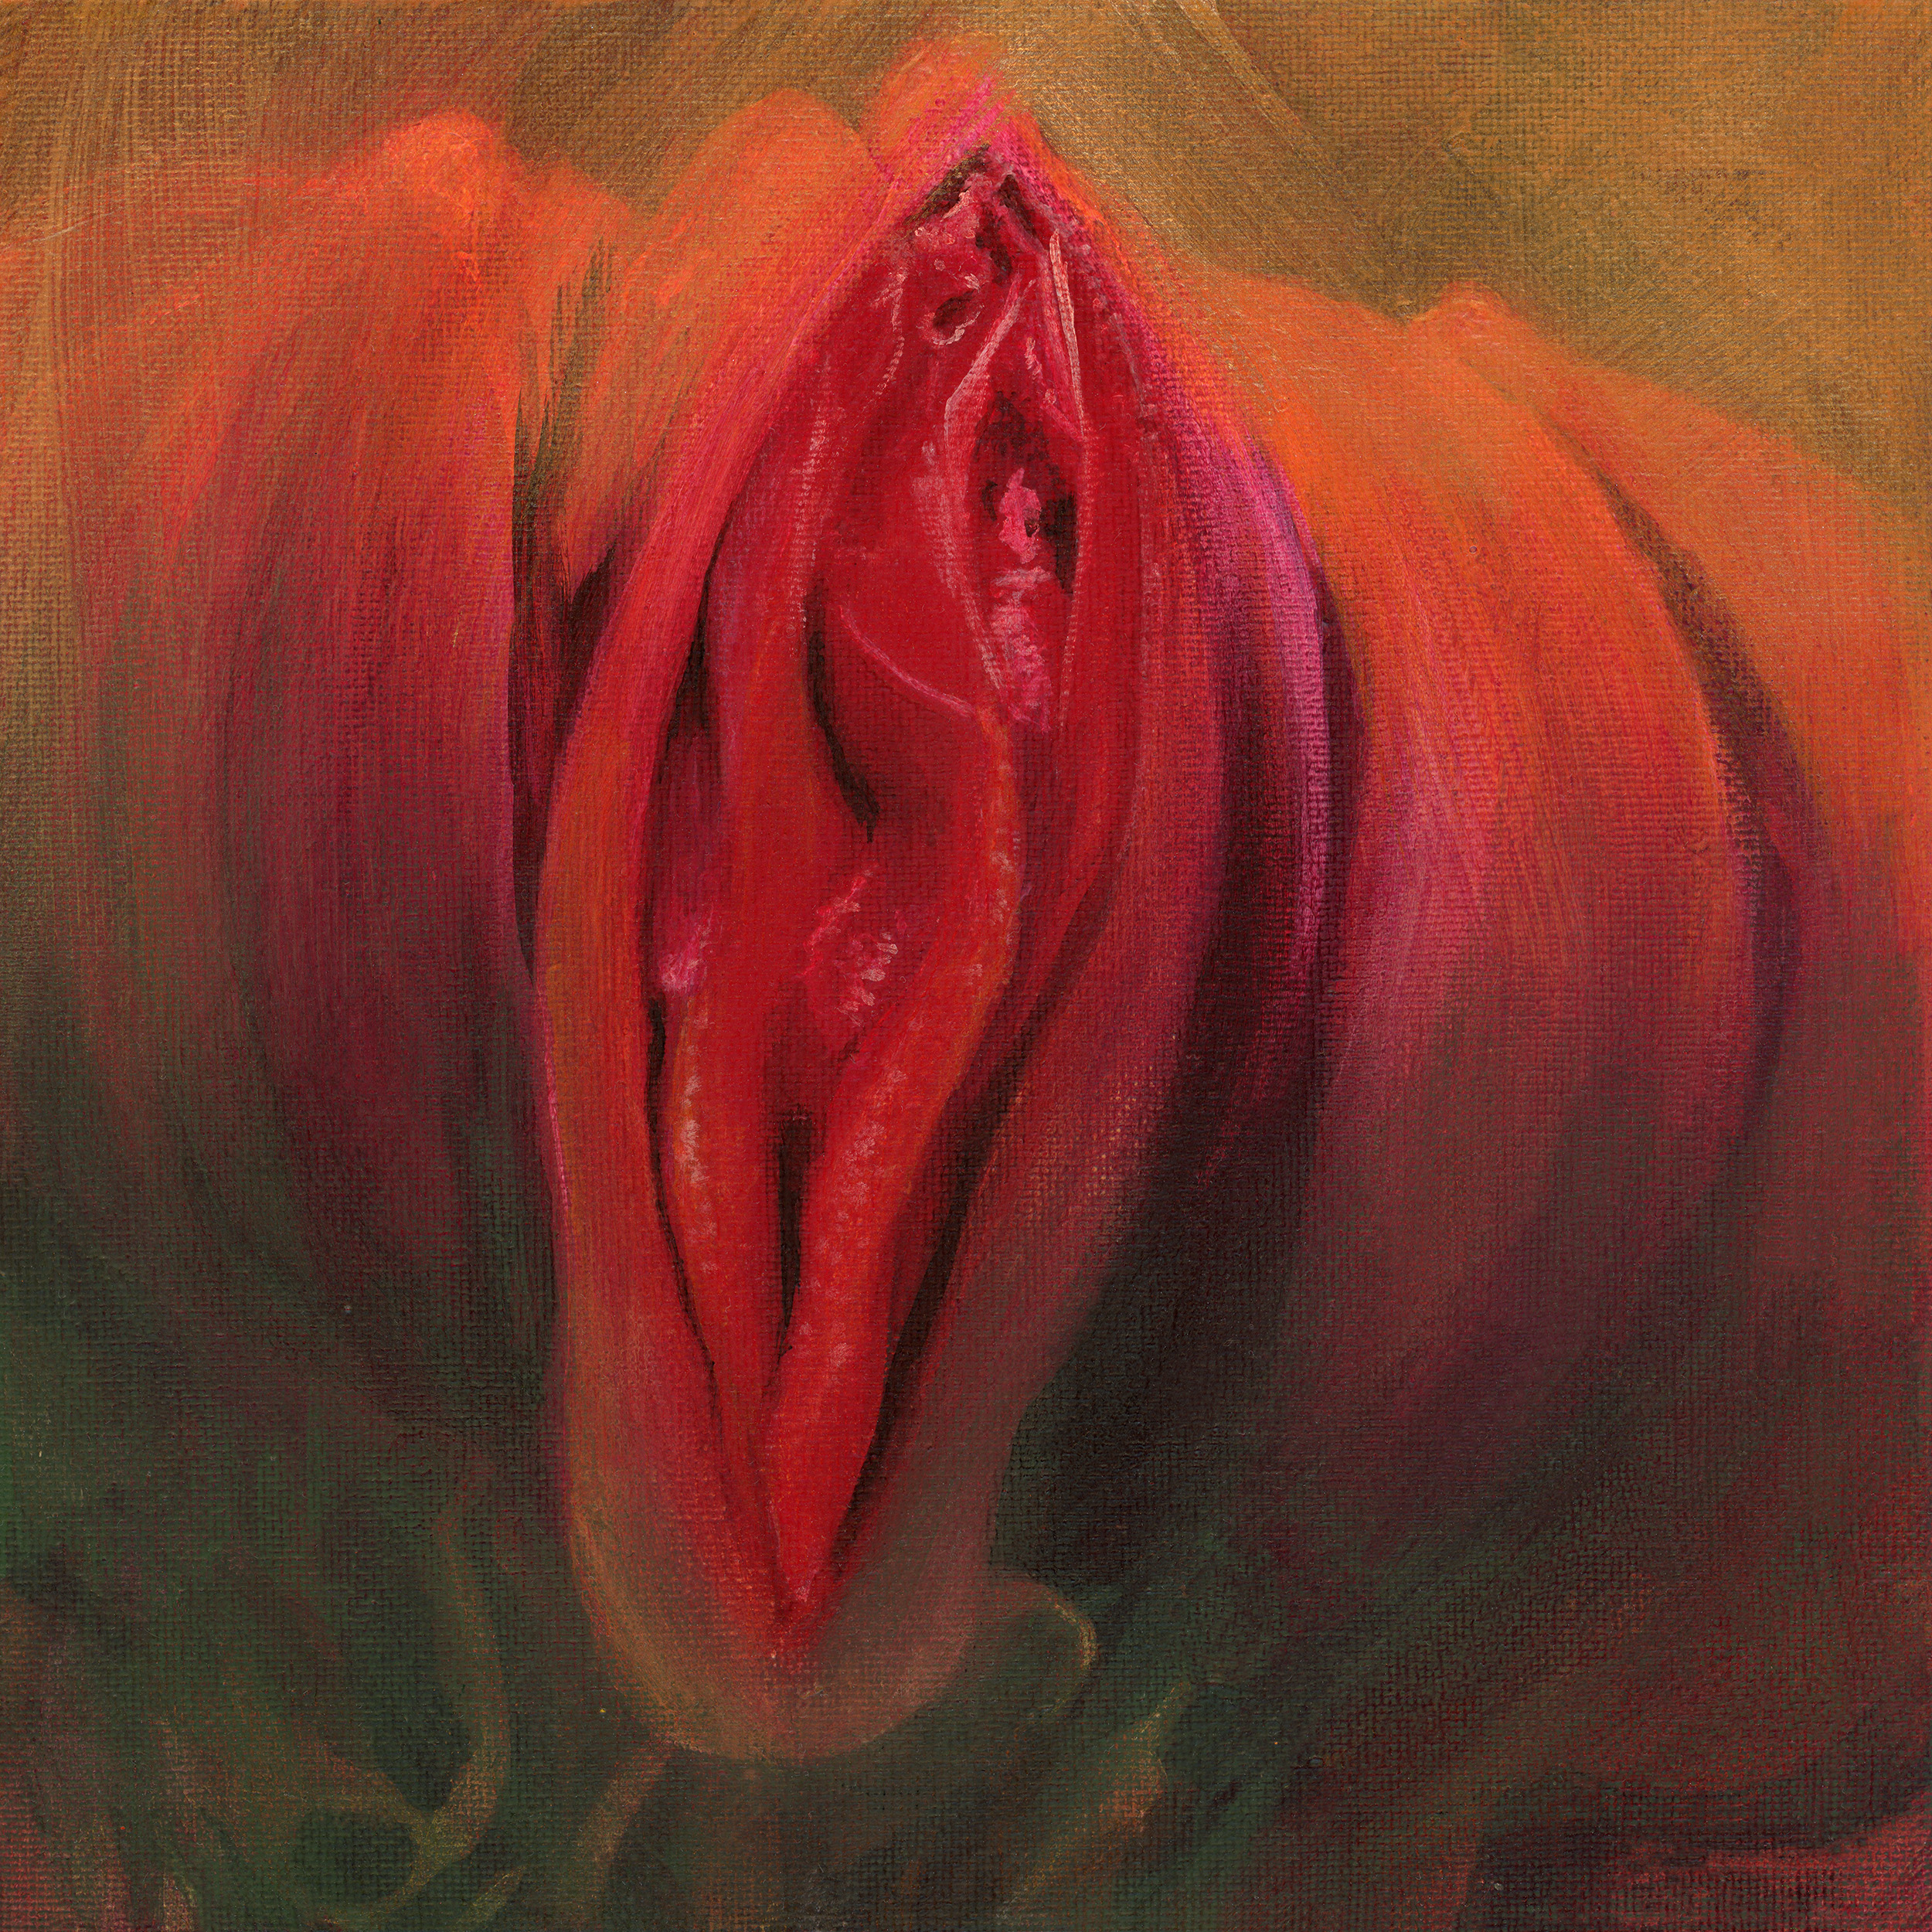 Painting of red flower with the petals in the shape of a vulva and looks like a fruit, on orange background.